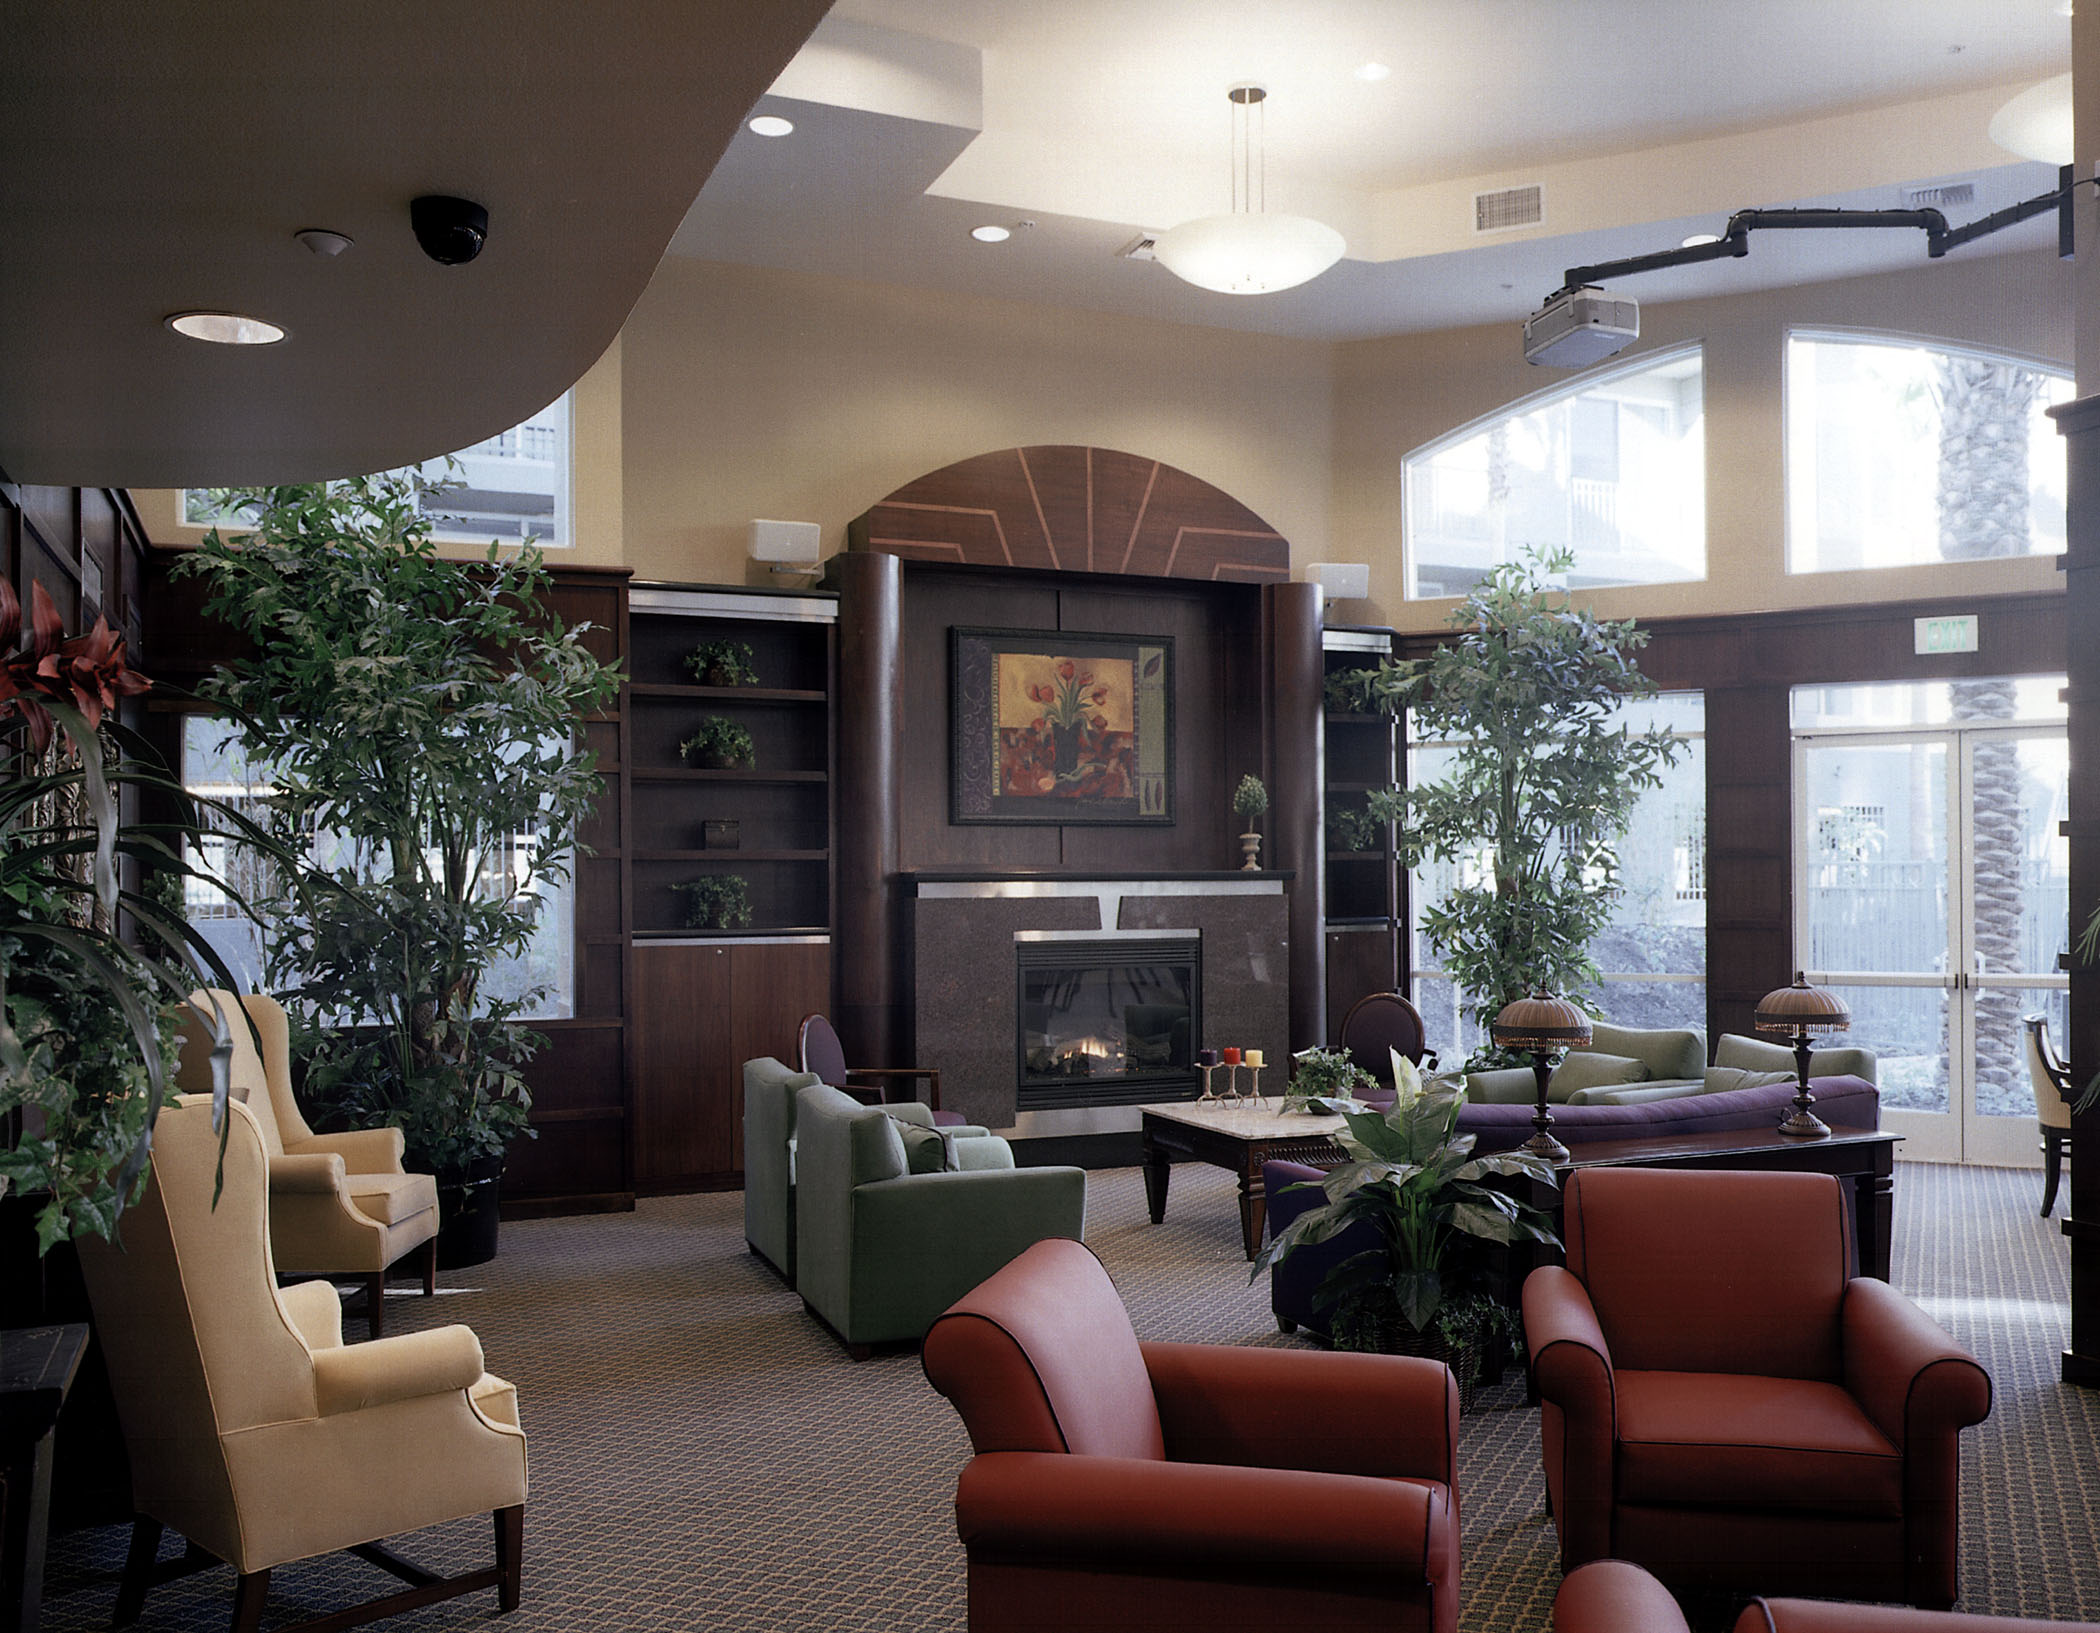 Indoor view of a lobbying area. There is a modern fireplace surrounded by a variety of sofas and plants.